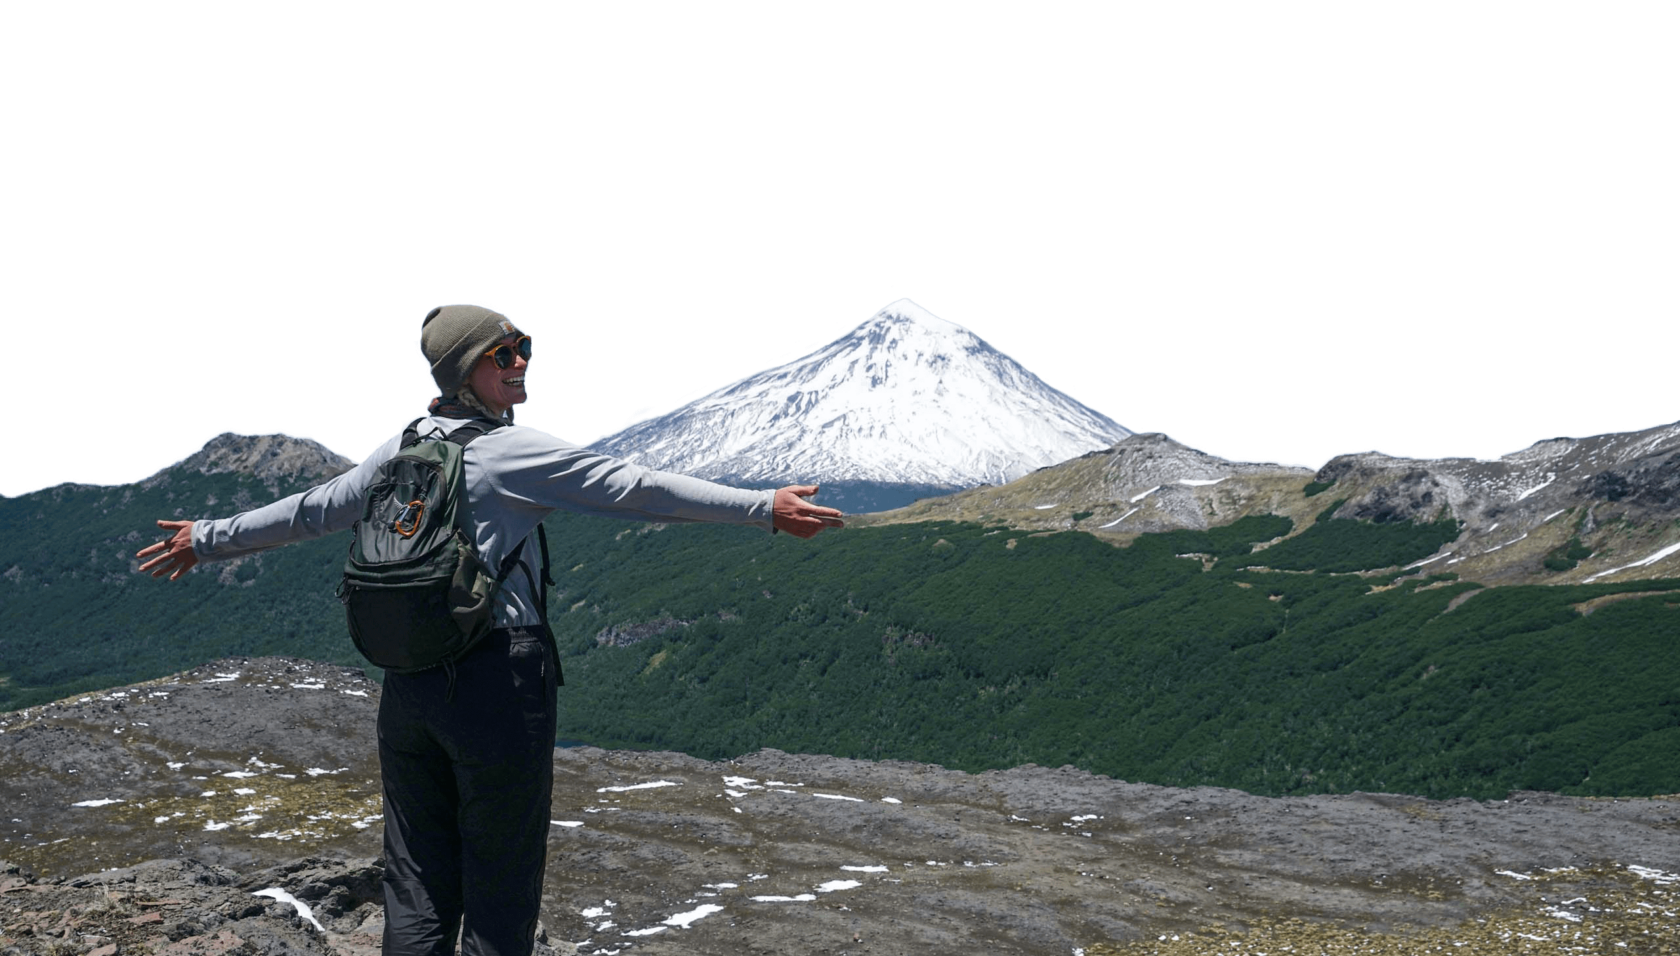 A woman with her arms outstretched towards a view of a snowcapped mountain.